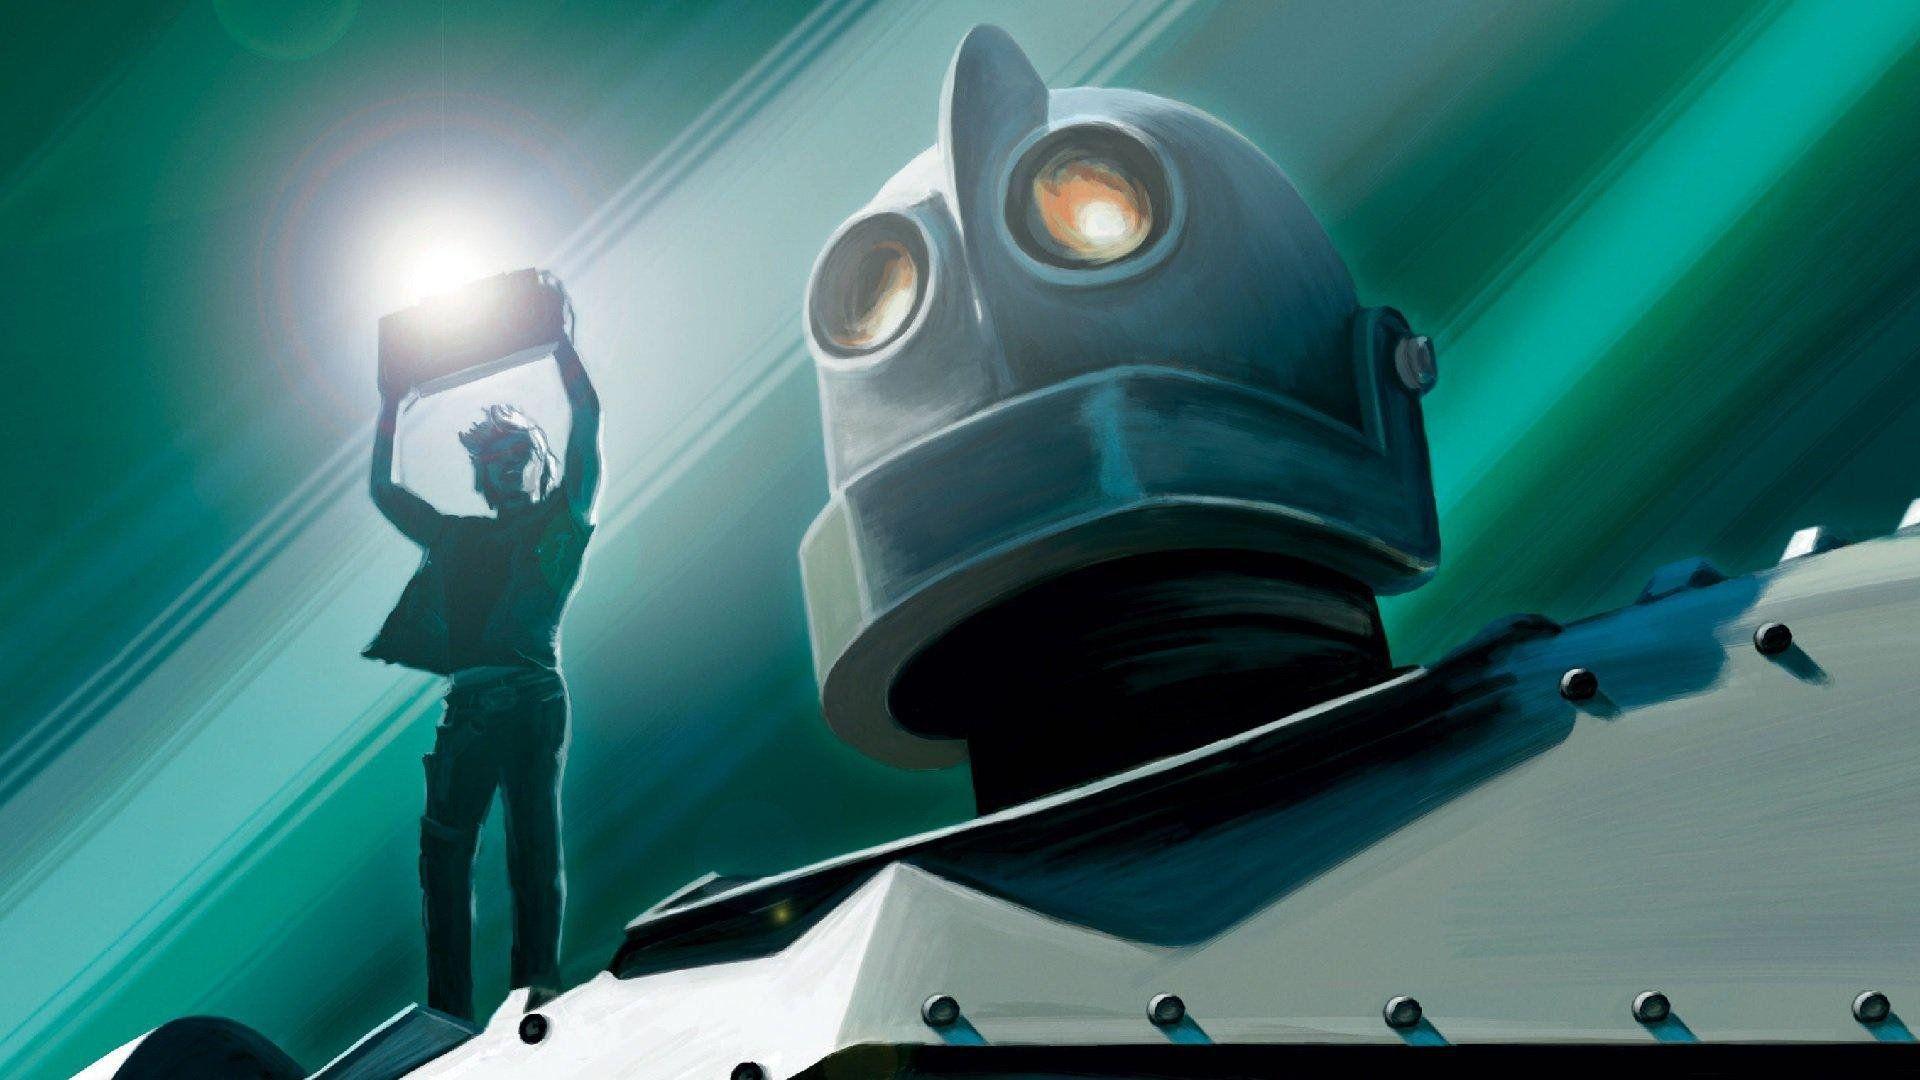 The Iron Giant Wallpaper, Picture